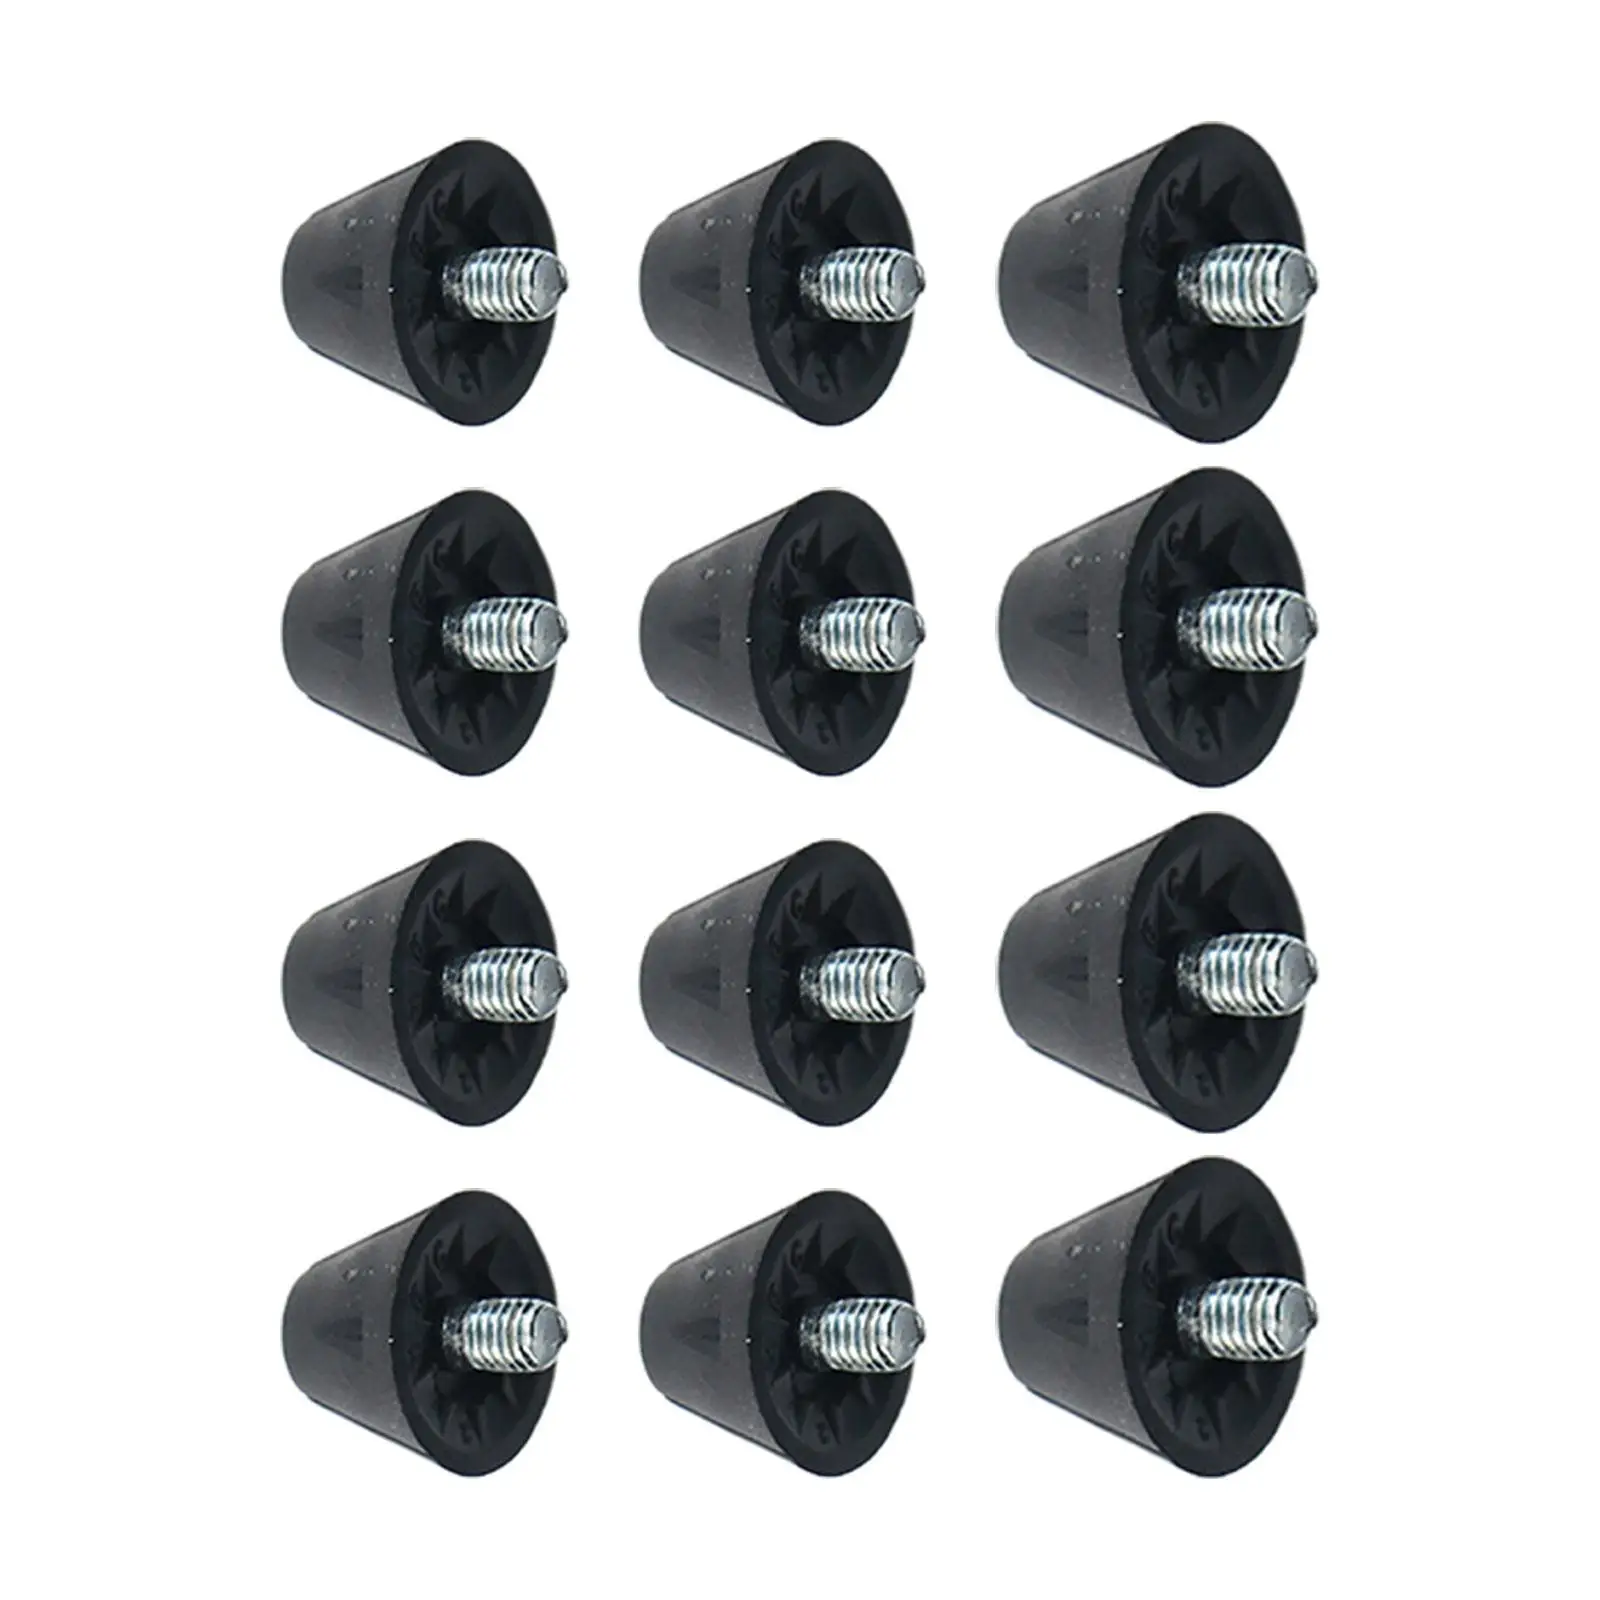 12x Football Shoe Spikes Professional Anti Slip 13mm 16mm Thread Screw 5mm Dia Replacement Spikes for Training Athletic Sneakers